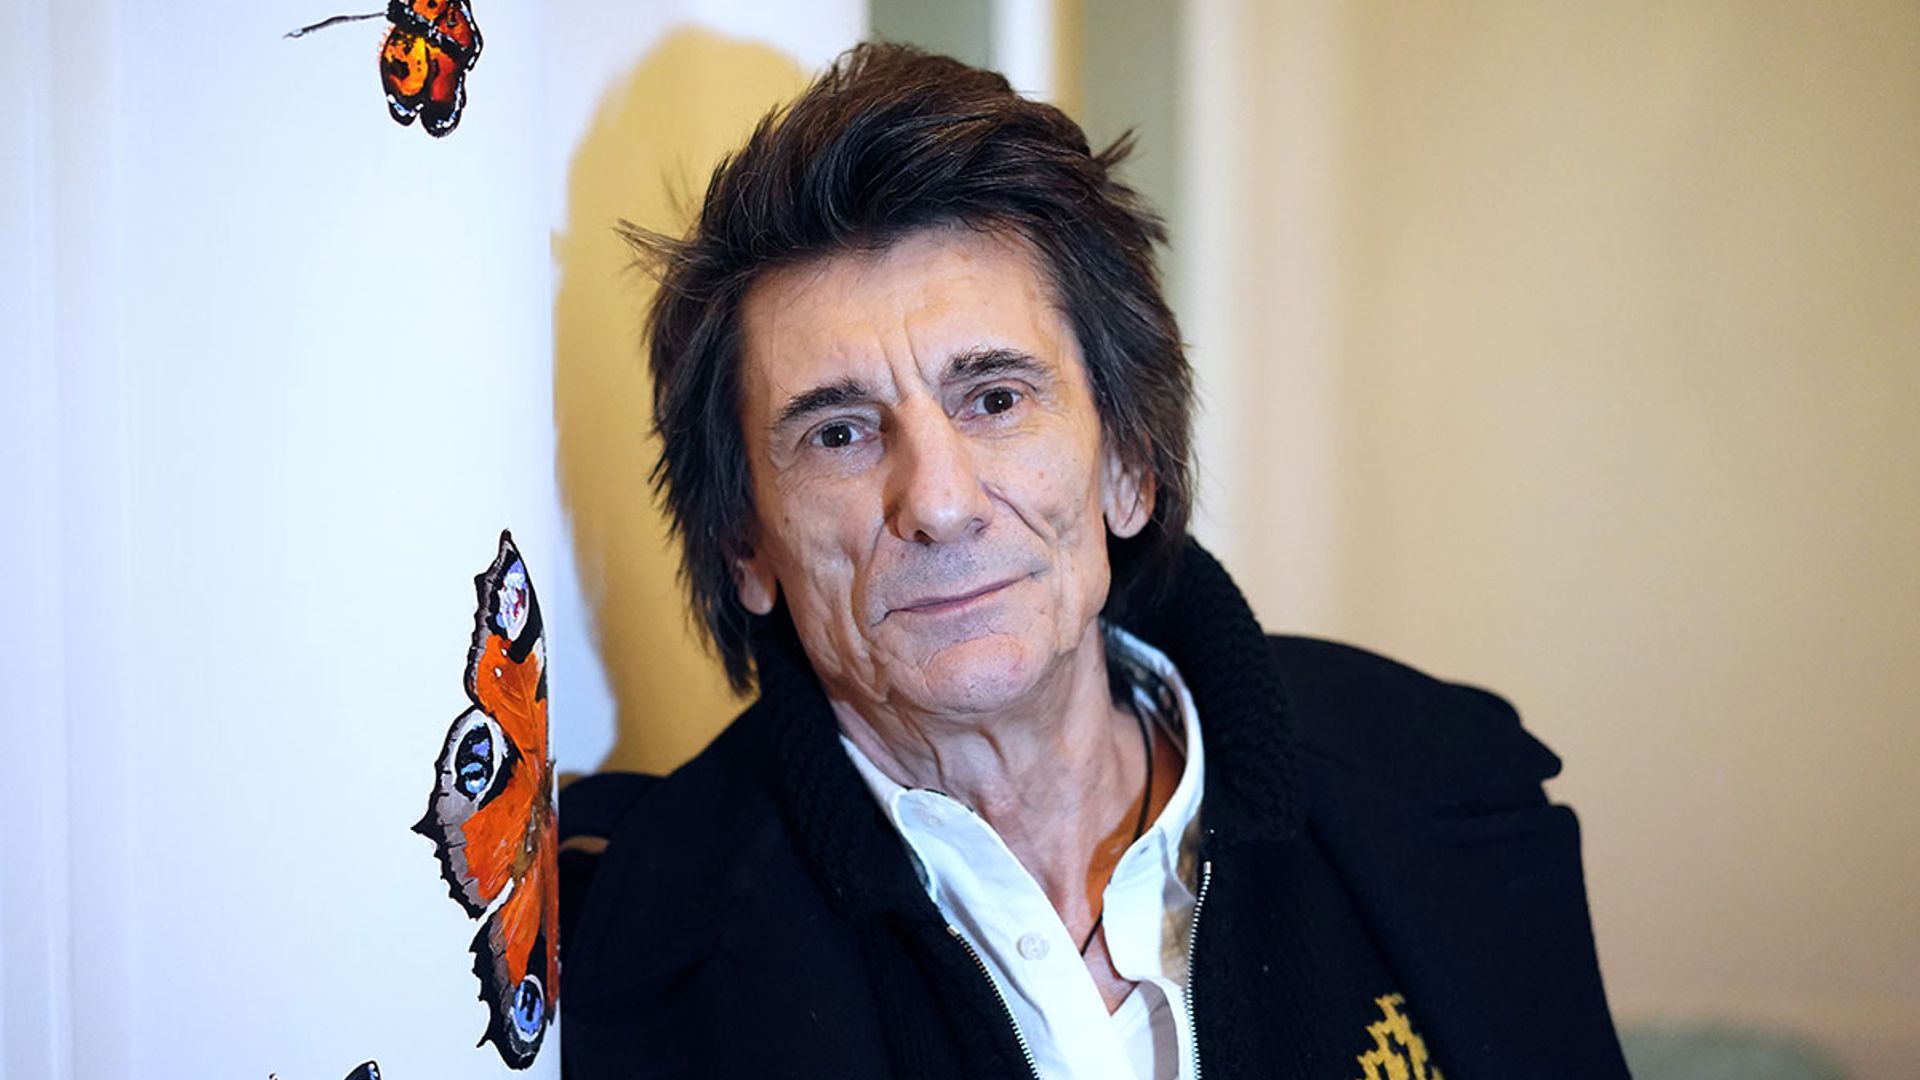 ronnie wood message